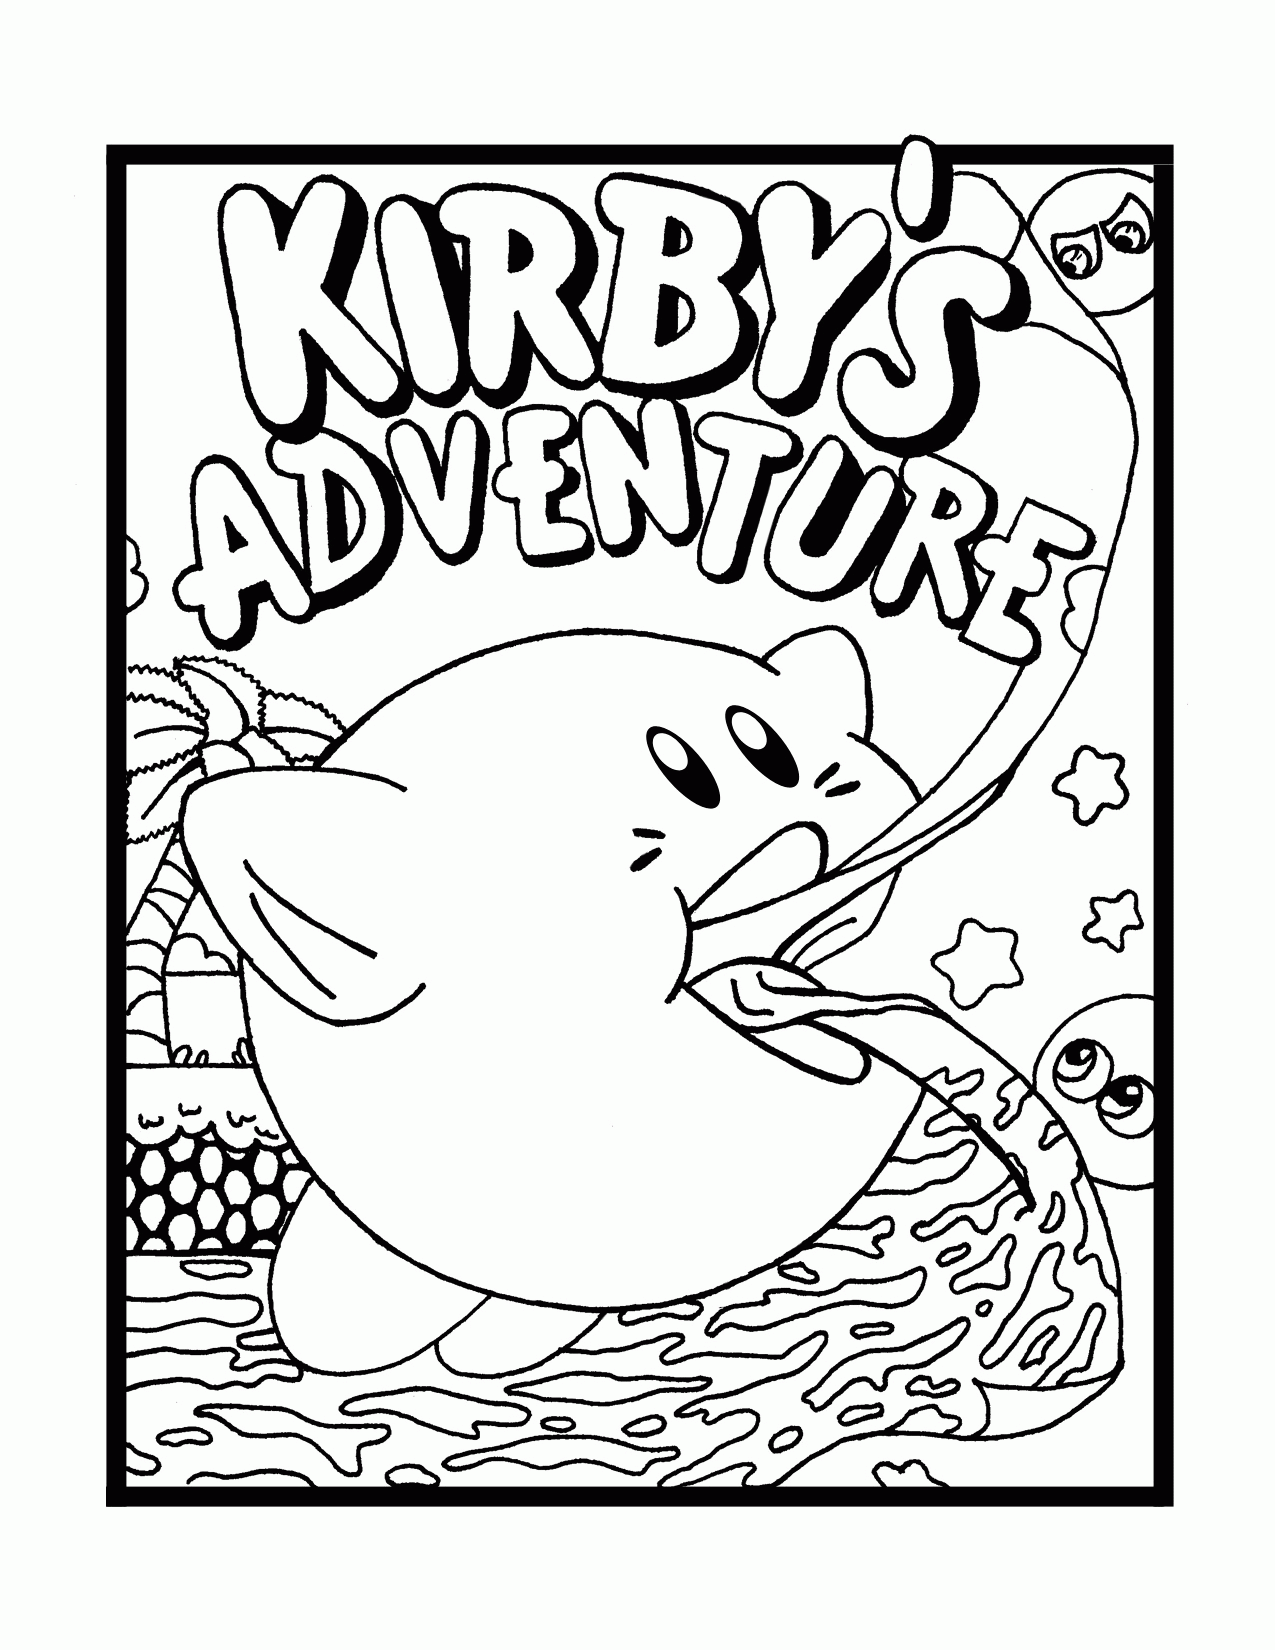 Kirby Coloring Pages Related Keywords & Suggestions - Kirby ...